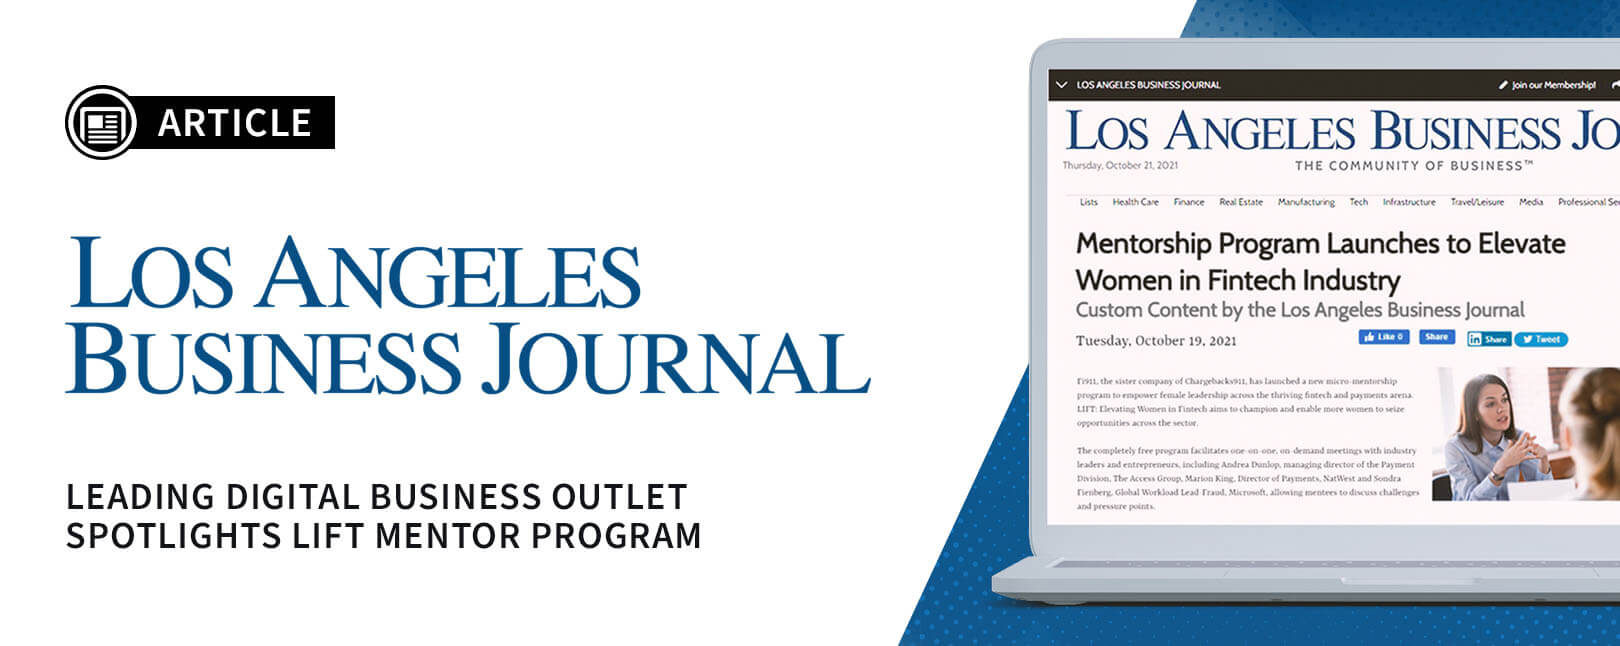 Chargebacks911® Featured in LA Business Journal